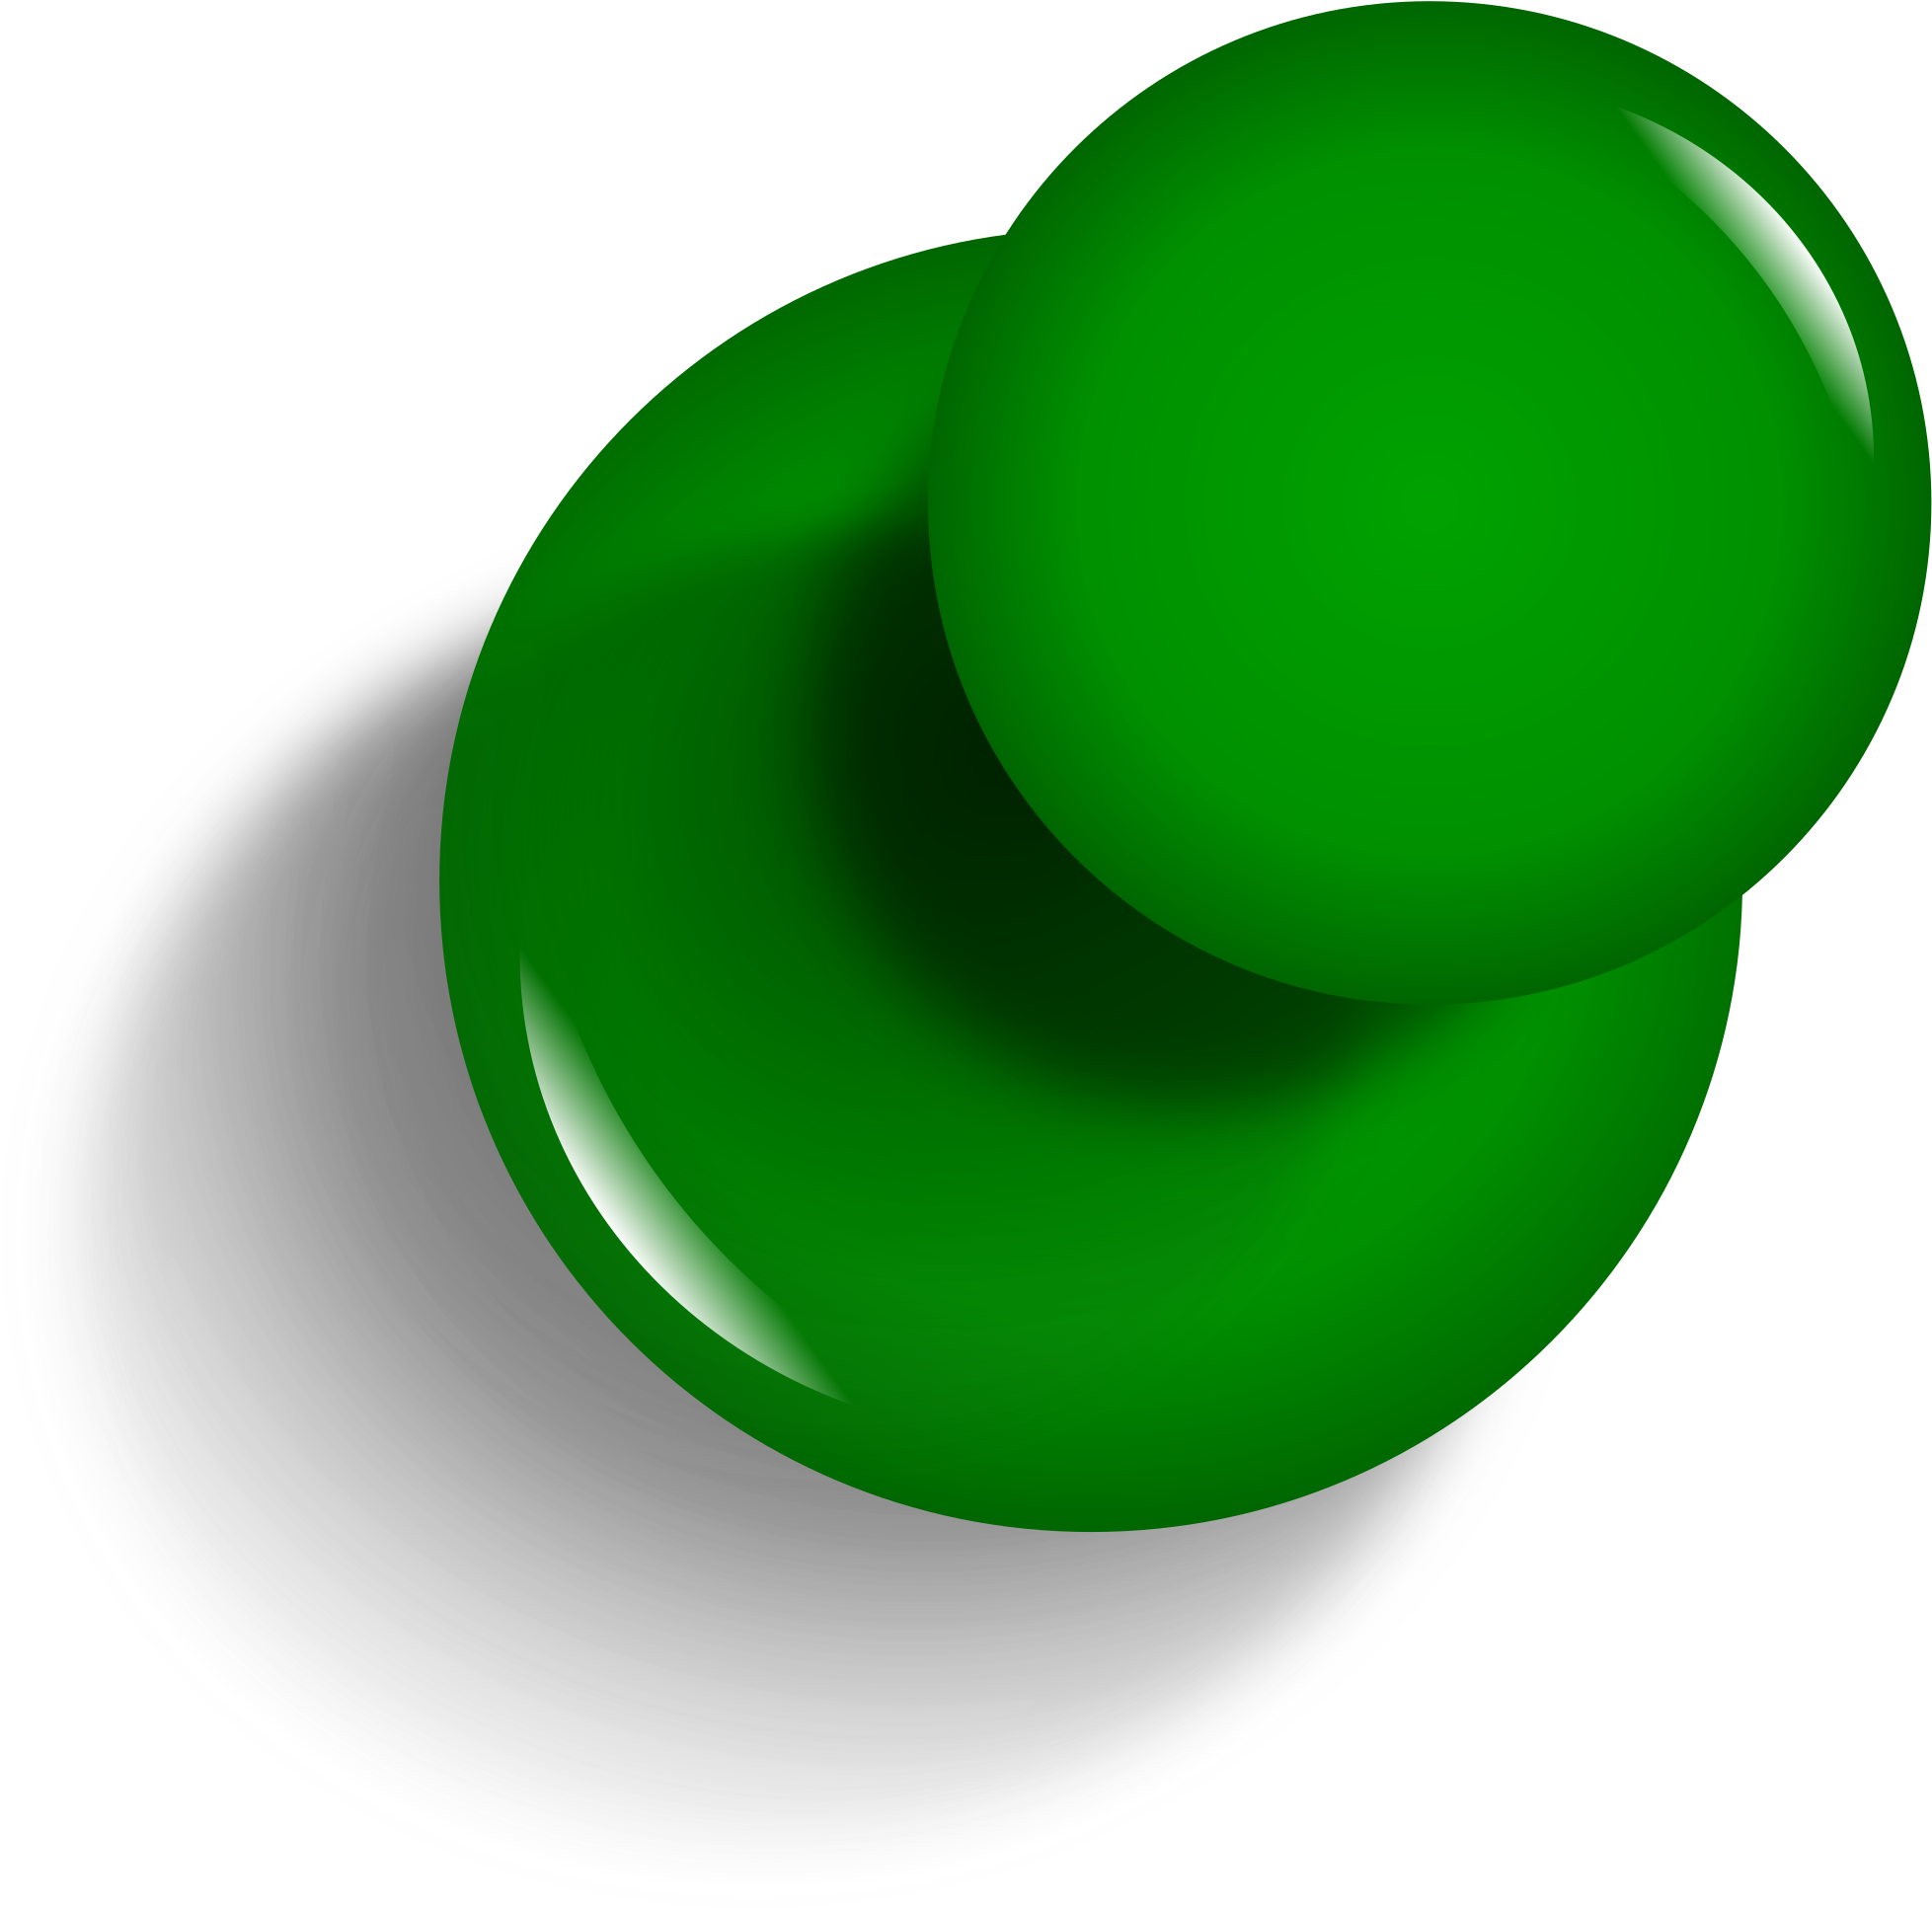 A Green Push Pin On A Black Background